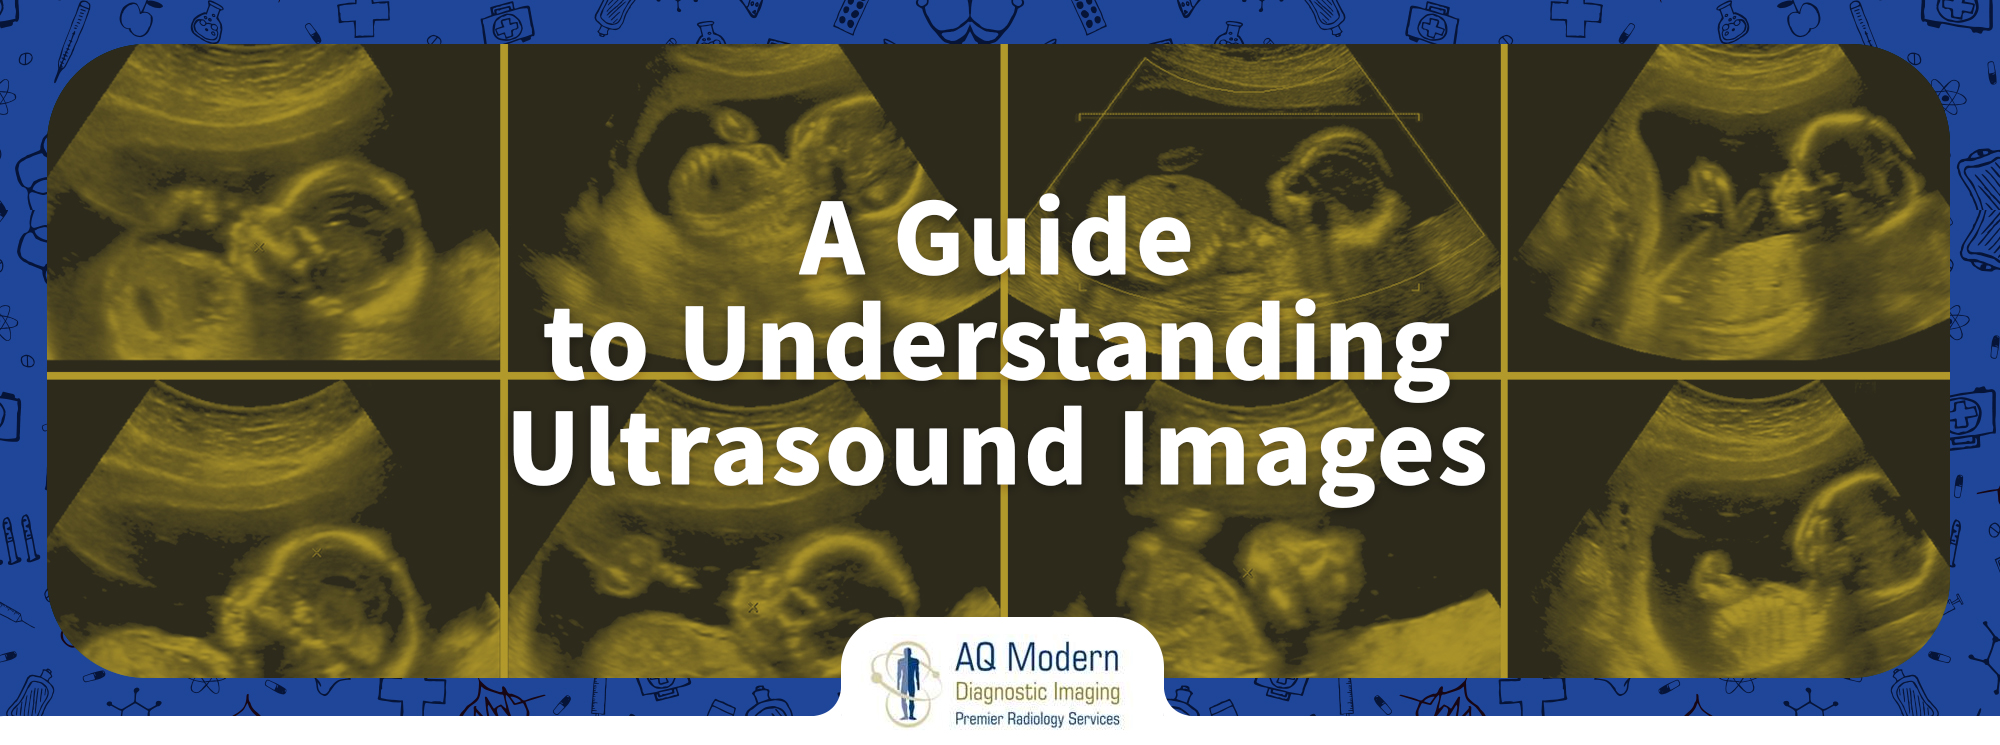 A Guide to Understanding Ultrasound Images